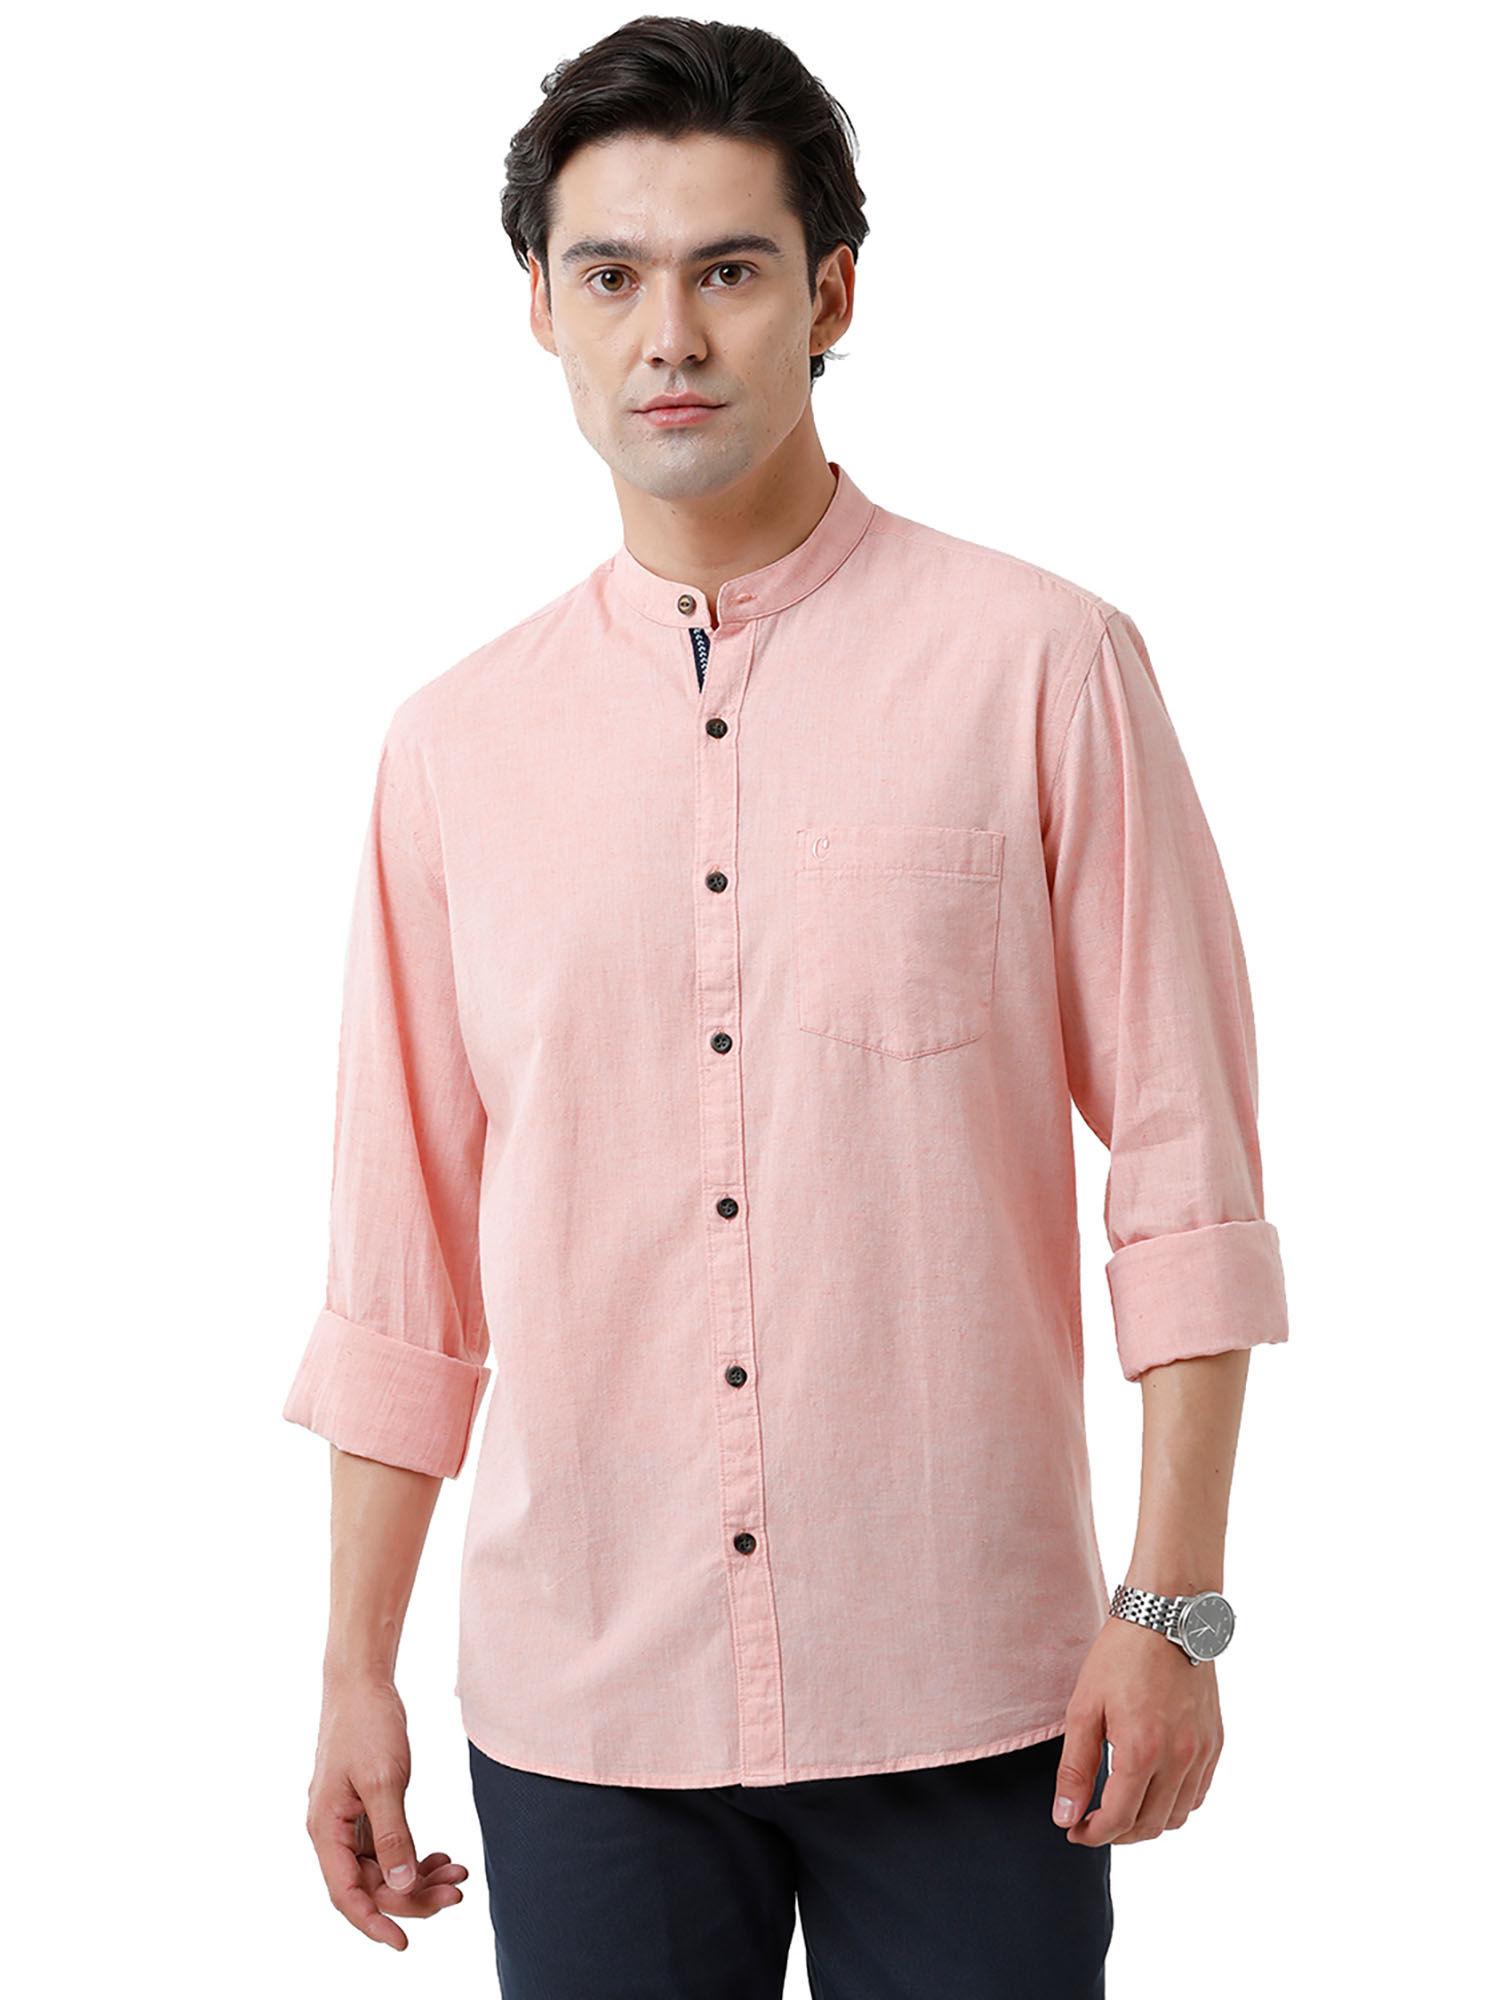 men's cotton linen red chambray slim fit full sleeve casual shirt